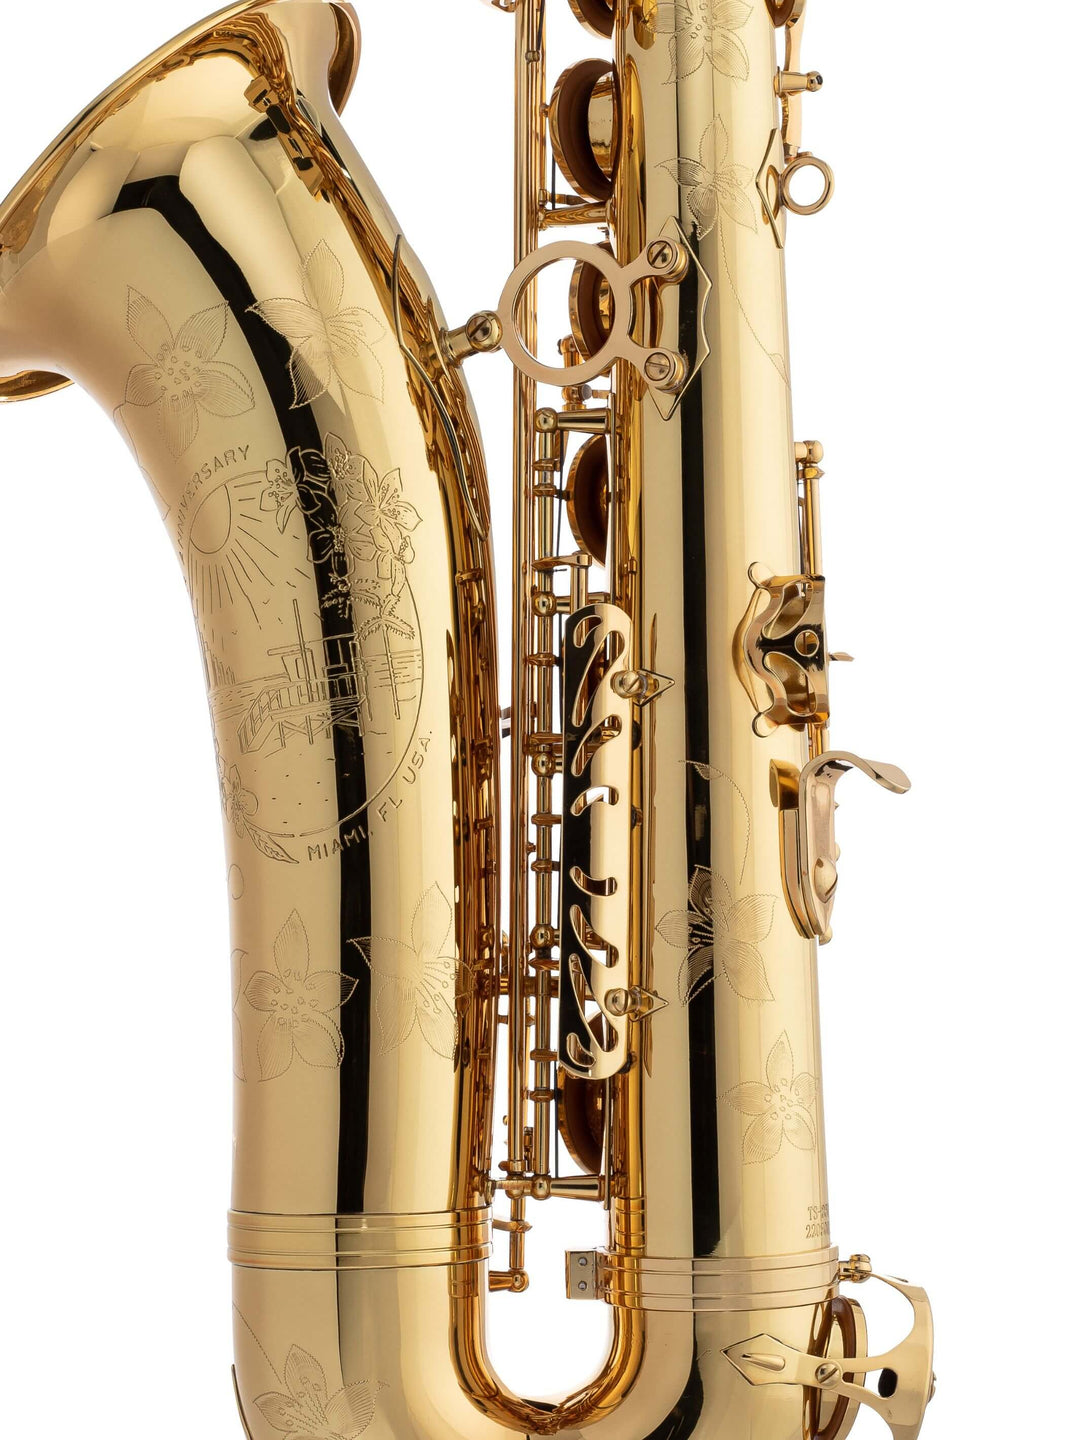 TS-860U Tenor Saxophone Unlacquered Bell and Engraving View 1#finish_unlacquered